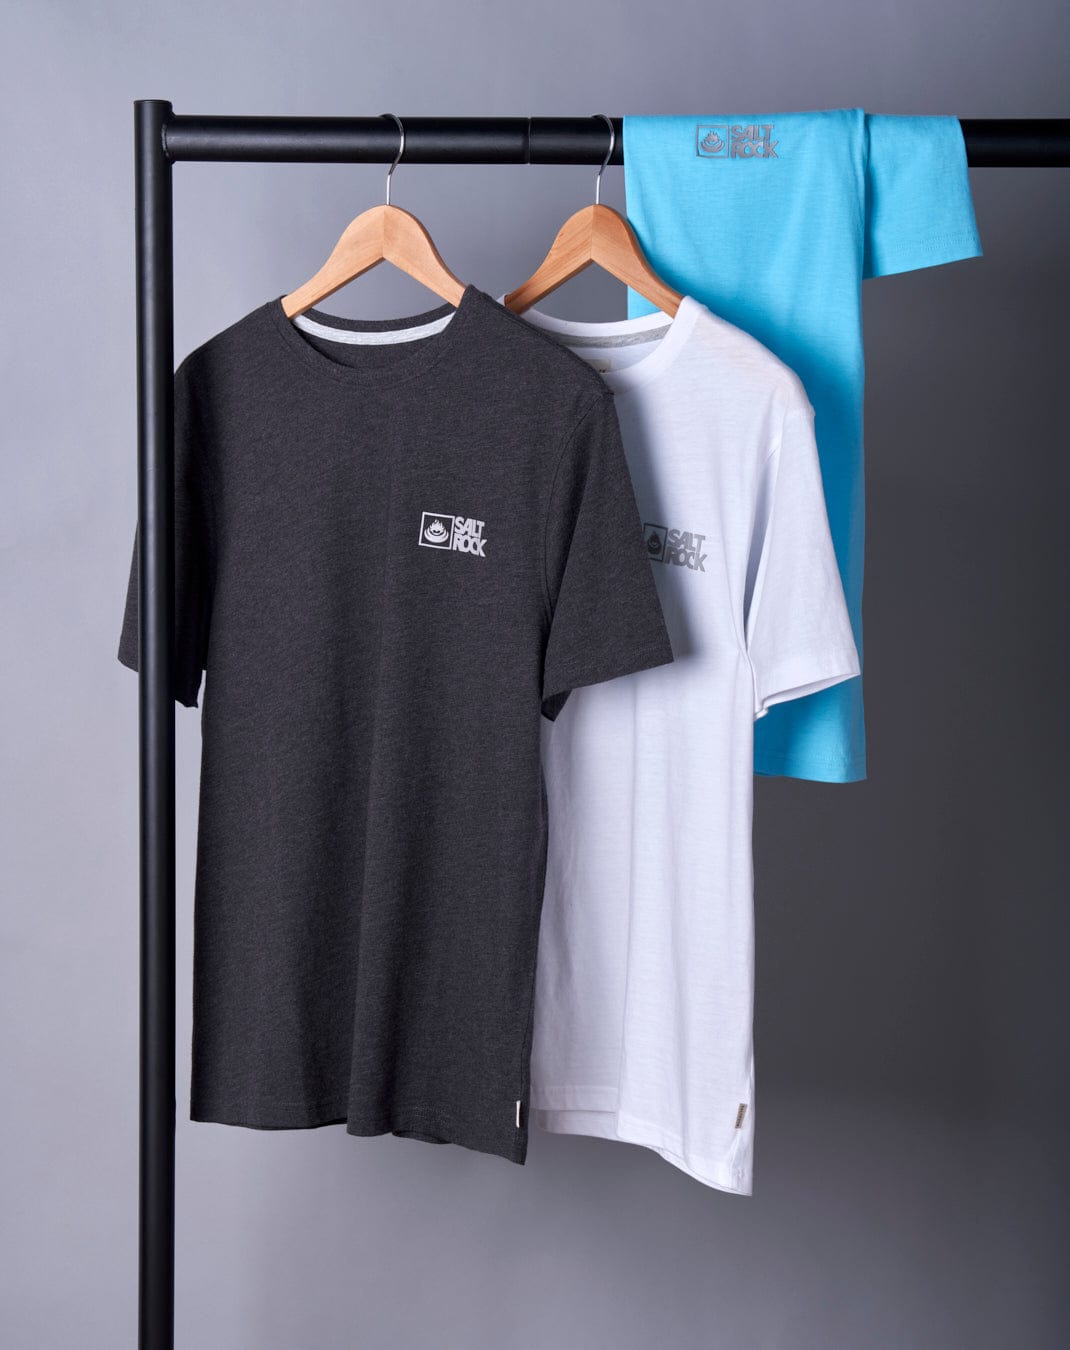 Three Saltrock Men's Short Sleeve T-shirts, everyday essentials from Corp 20 - Mens Short Sleeve T-Shirt - White, hanging on a rack.